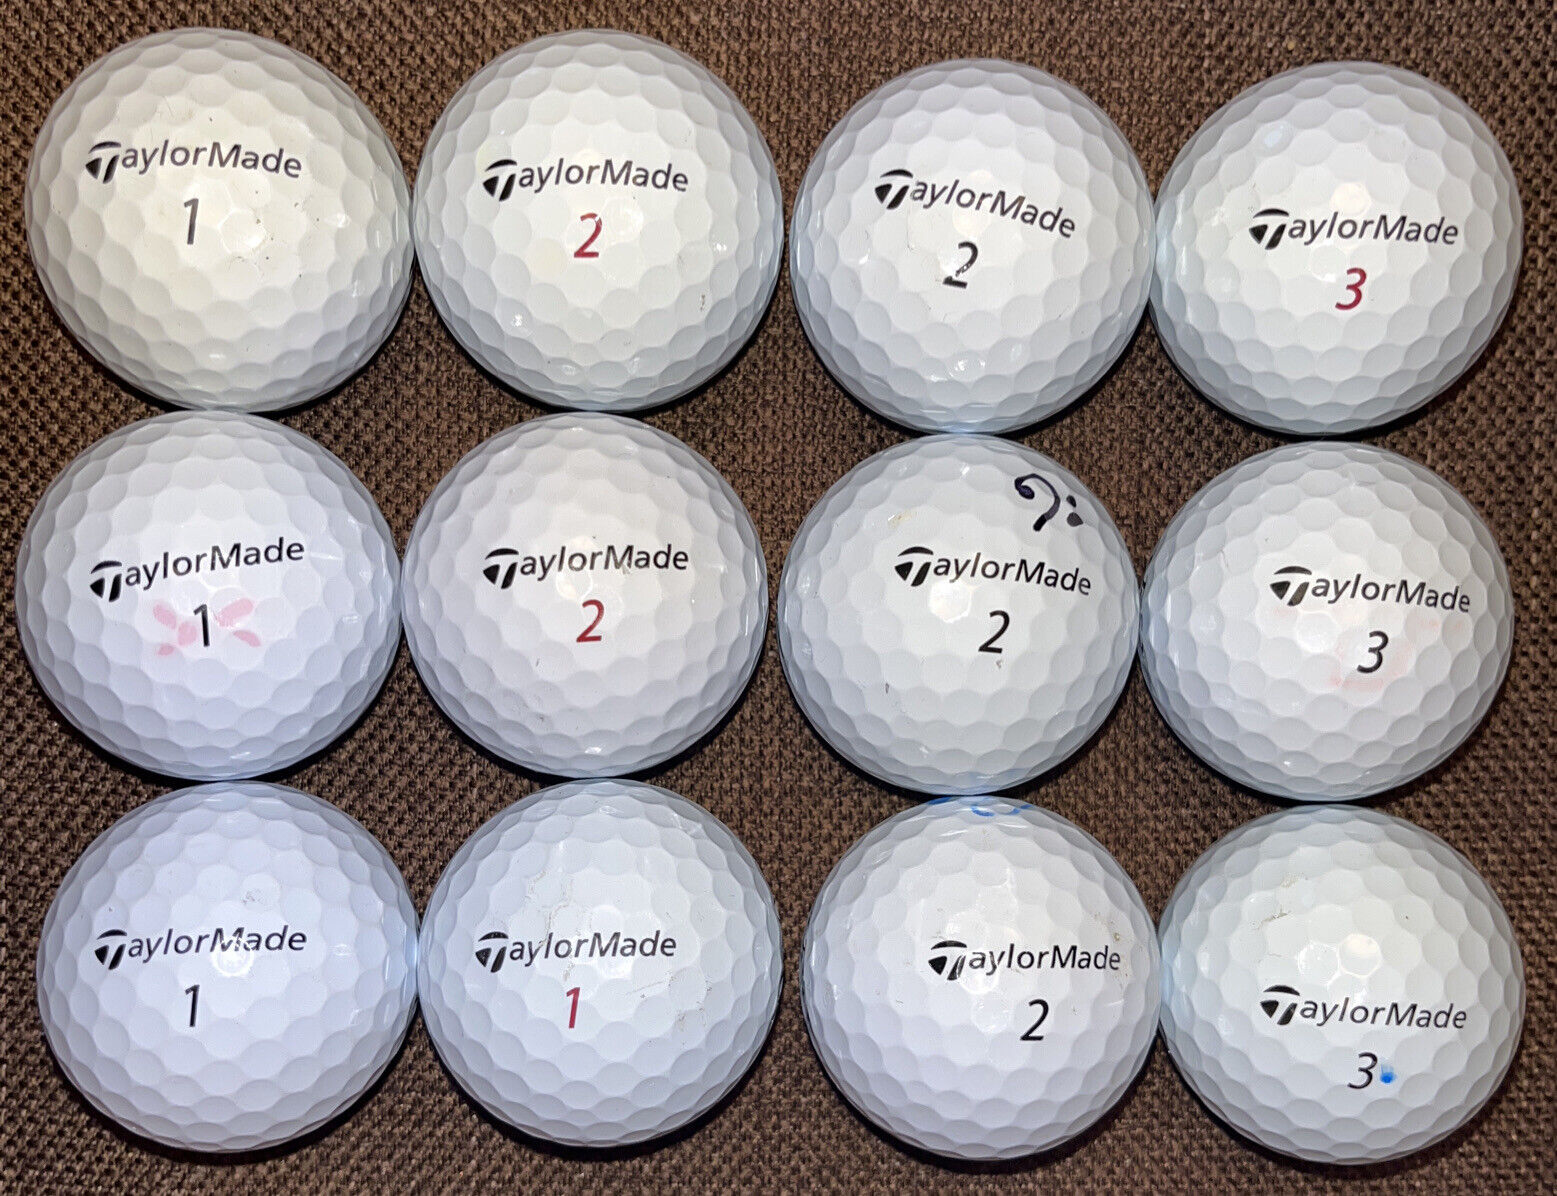 Mixed Lot of 12 used TaylorMade Golf Balls - TP5 & TP5x - For Play or Practice